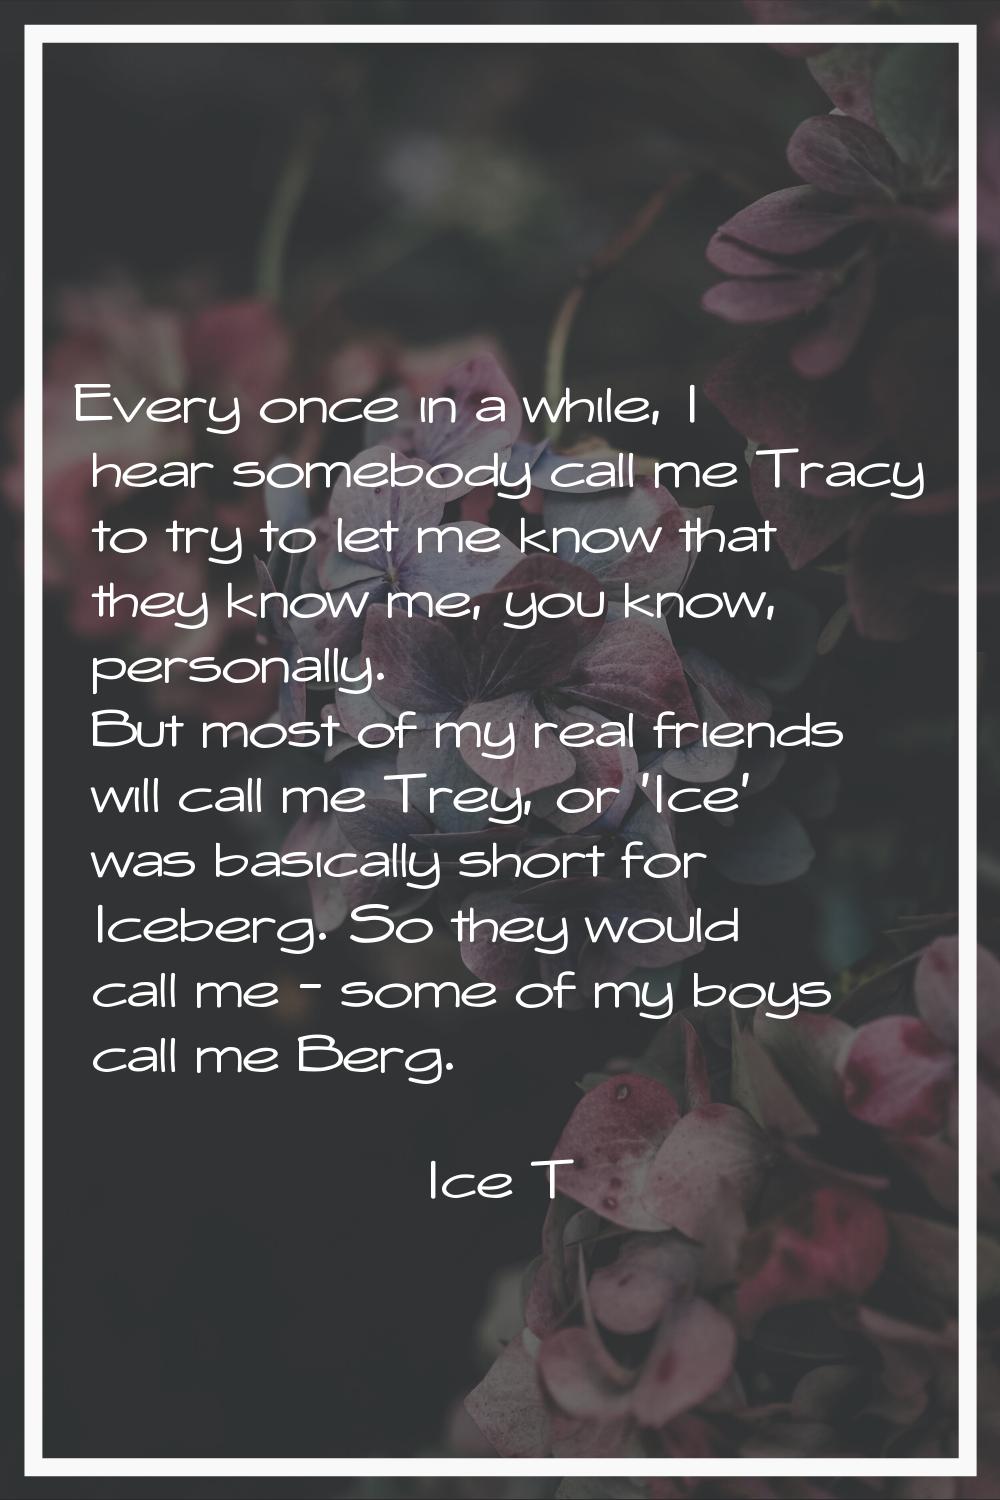 Every once in a while, I hear somebody call me Tracy to try to let me know that they know me, you k